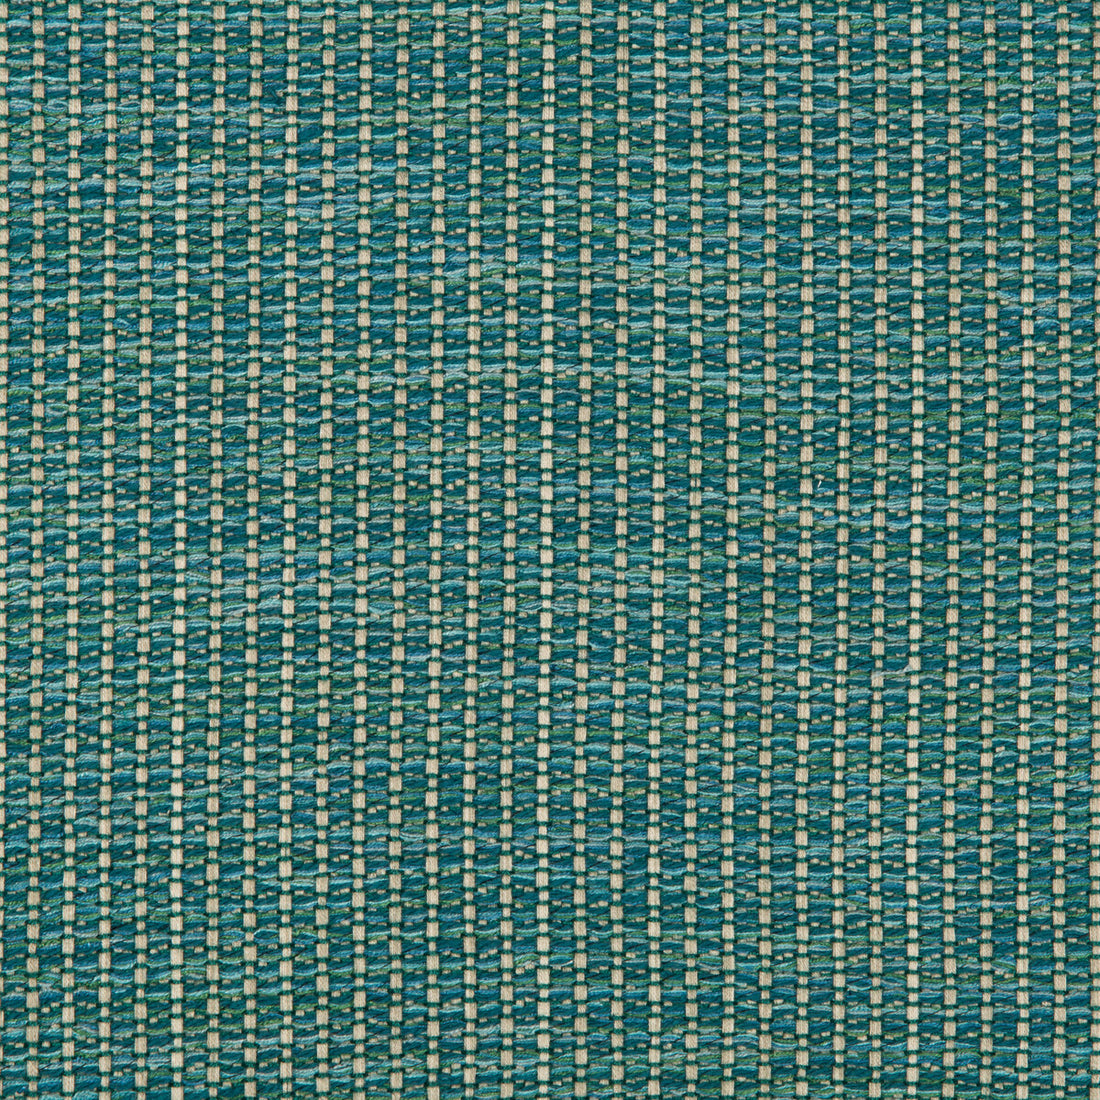 Kravet Design fabric in 35123-35 color - pattern 35123.35.0 - by Kravet Design in the Performance Crypton Home collection